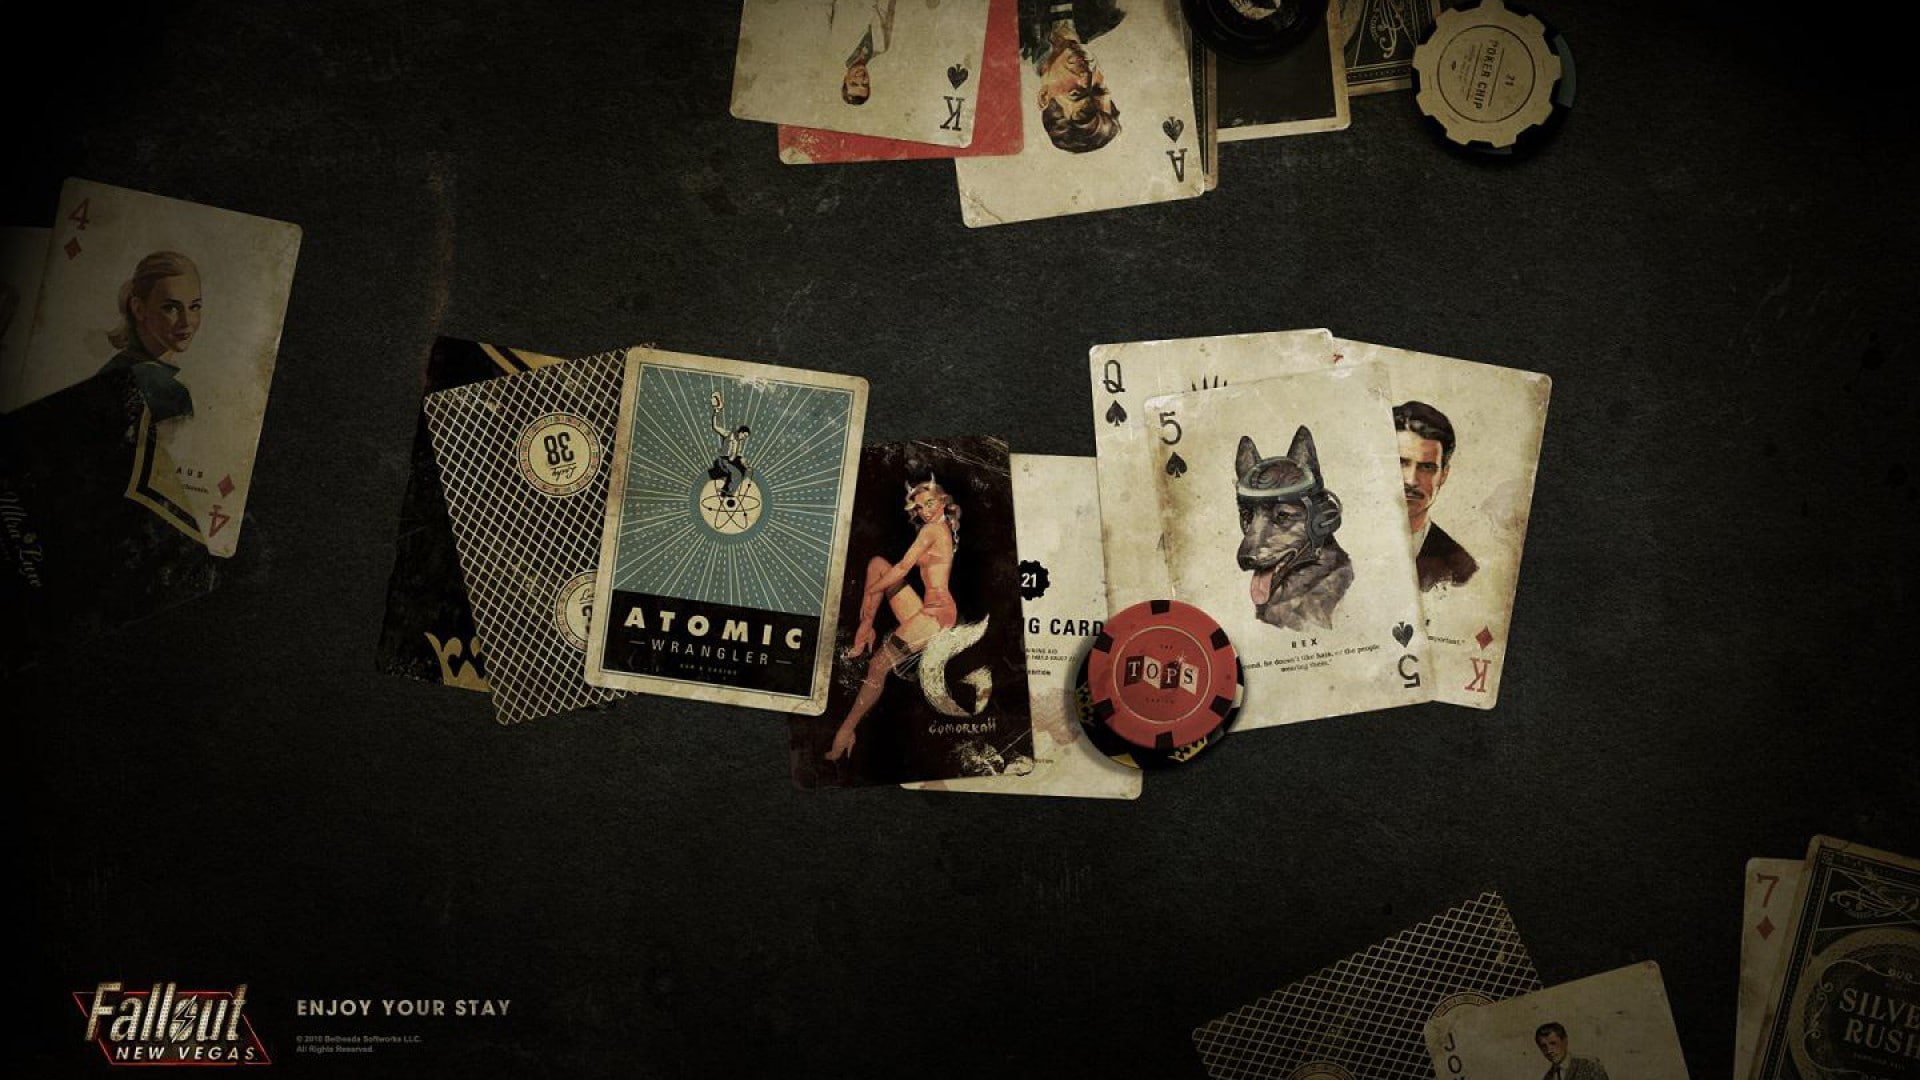 Fallout: New Vegas, video games, poker, playing cards